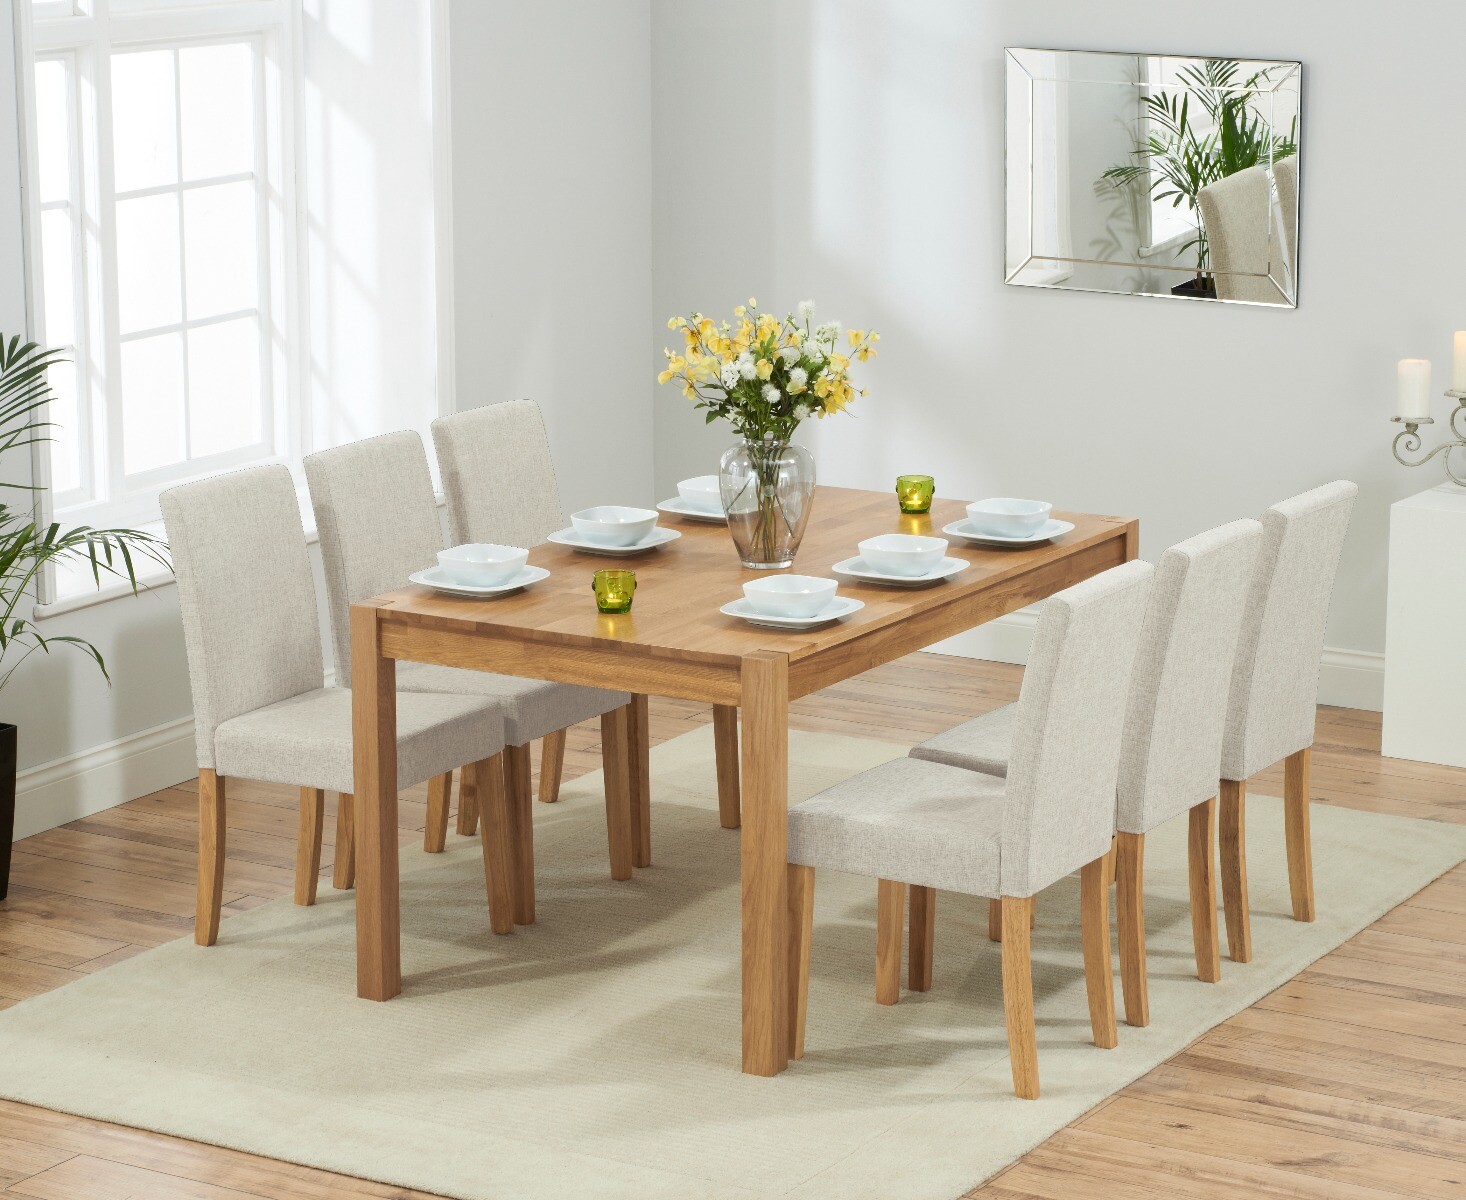 York 150cm Solid Oak Dining Table With 6 Grey Lila Chairs